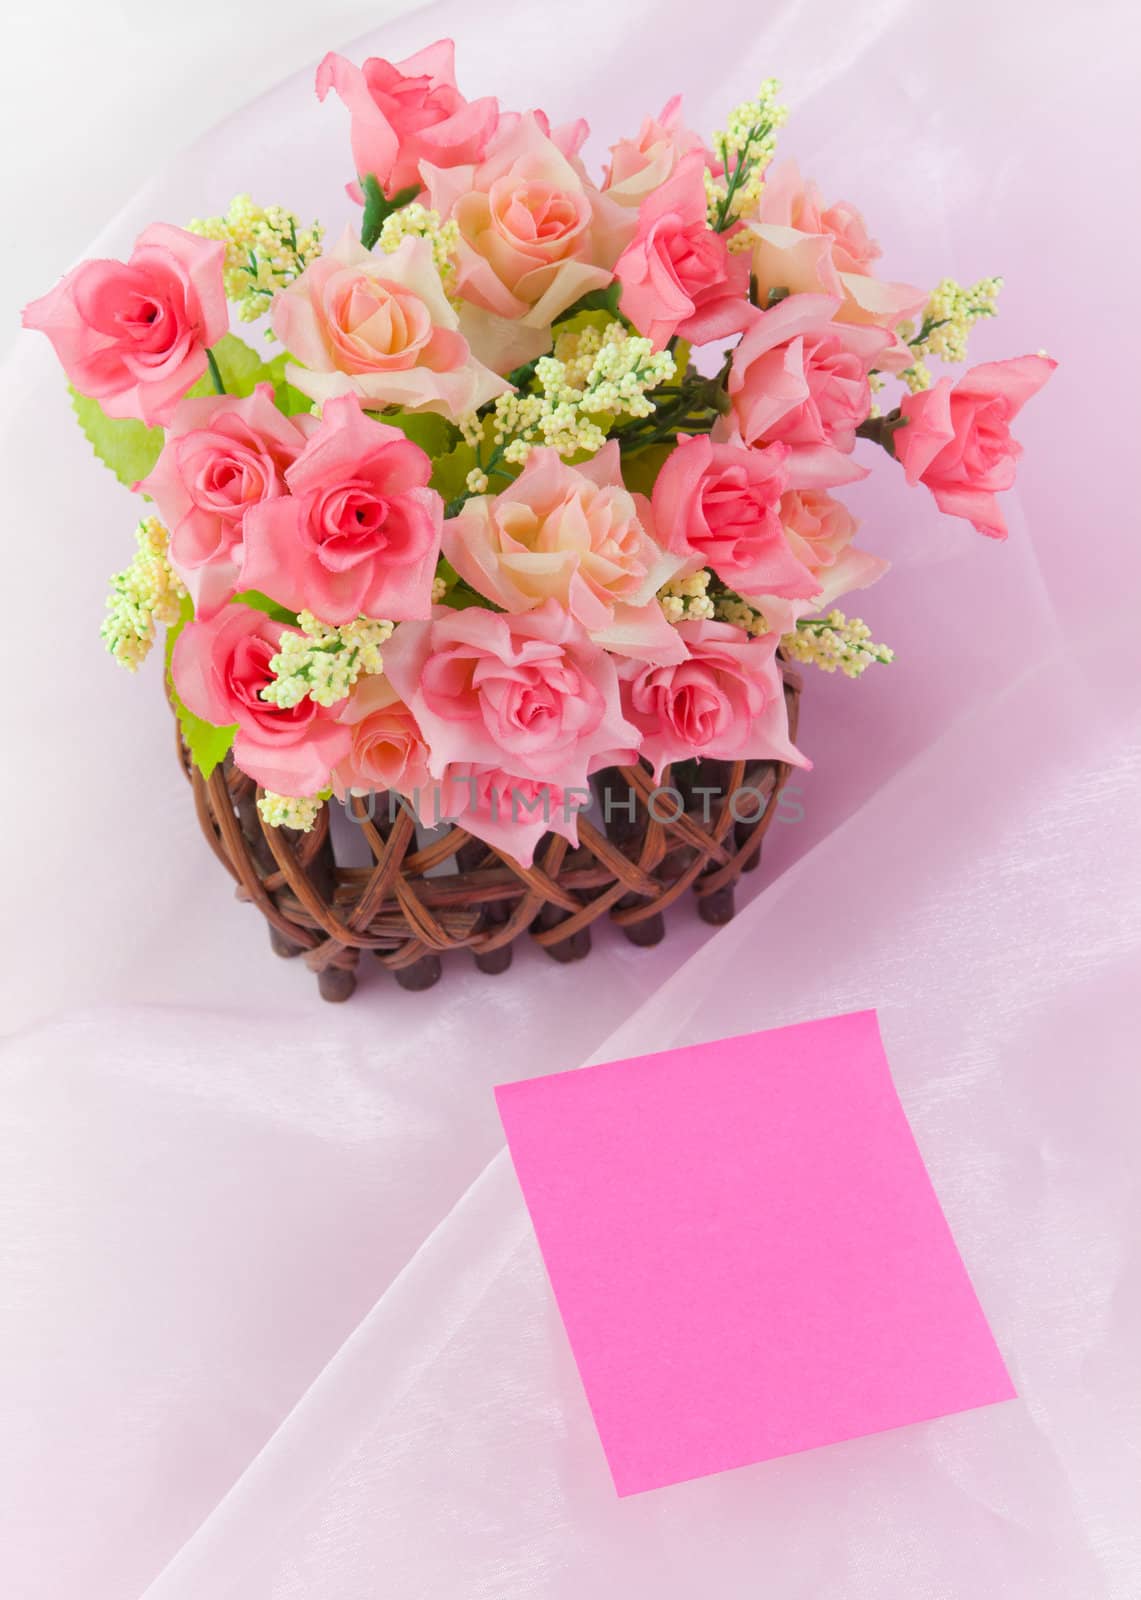 Roses in wood basket on fabric pink background